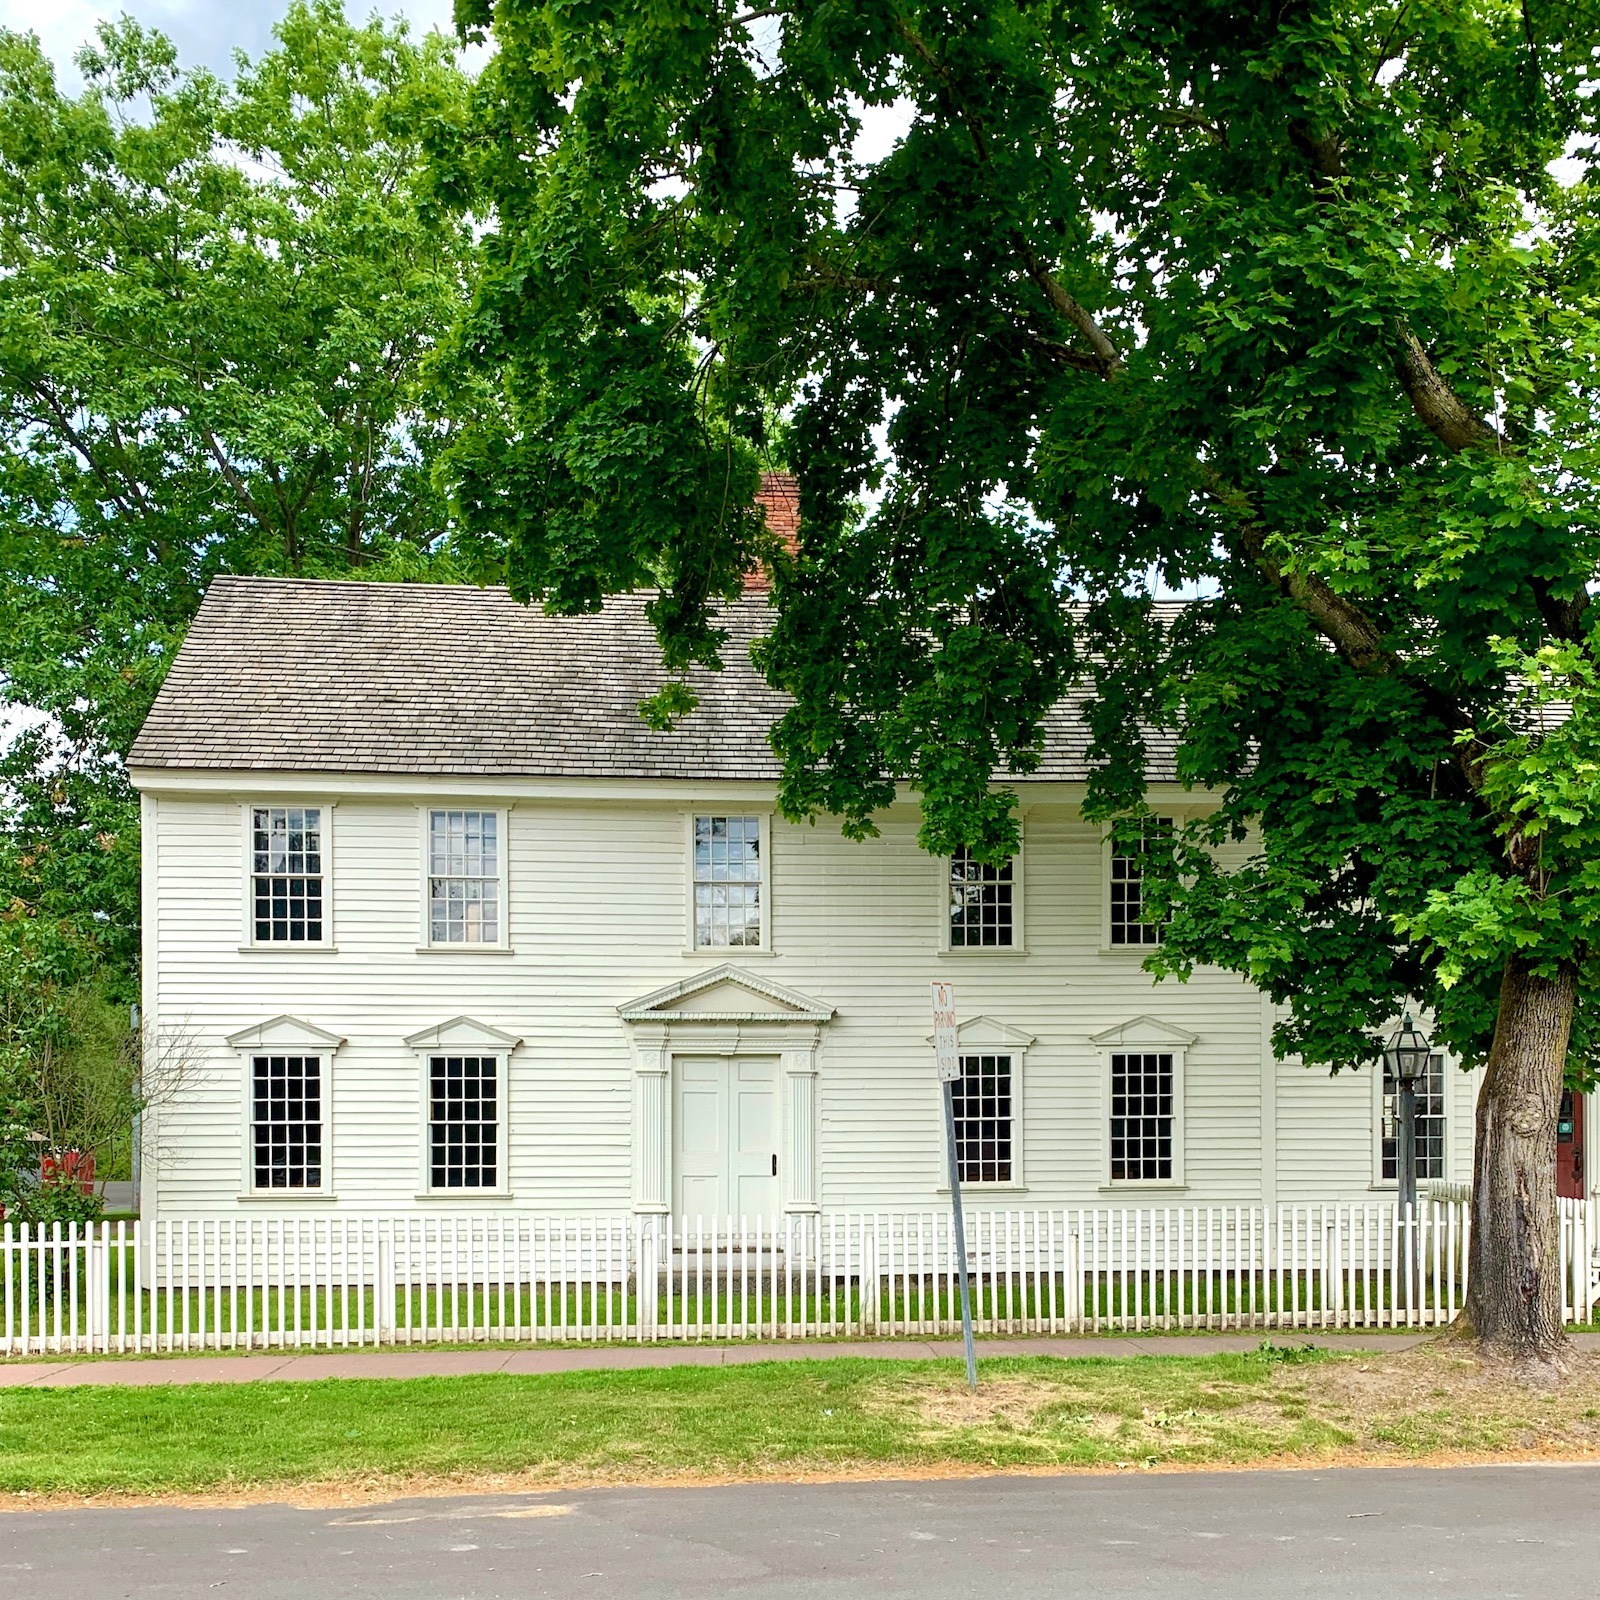 Visitor's Center - Hall Tavern - built in 1760 in Charlemont, Massachusetts - classic Federal Architecture - Historic Deerfield - photo: LBInteriors